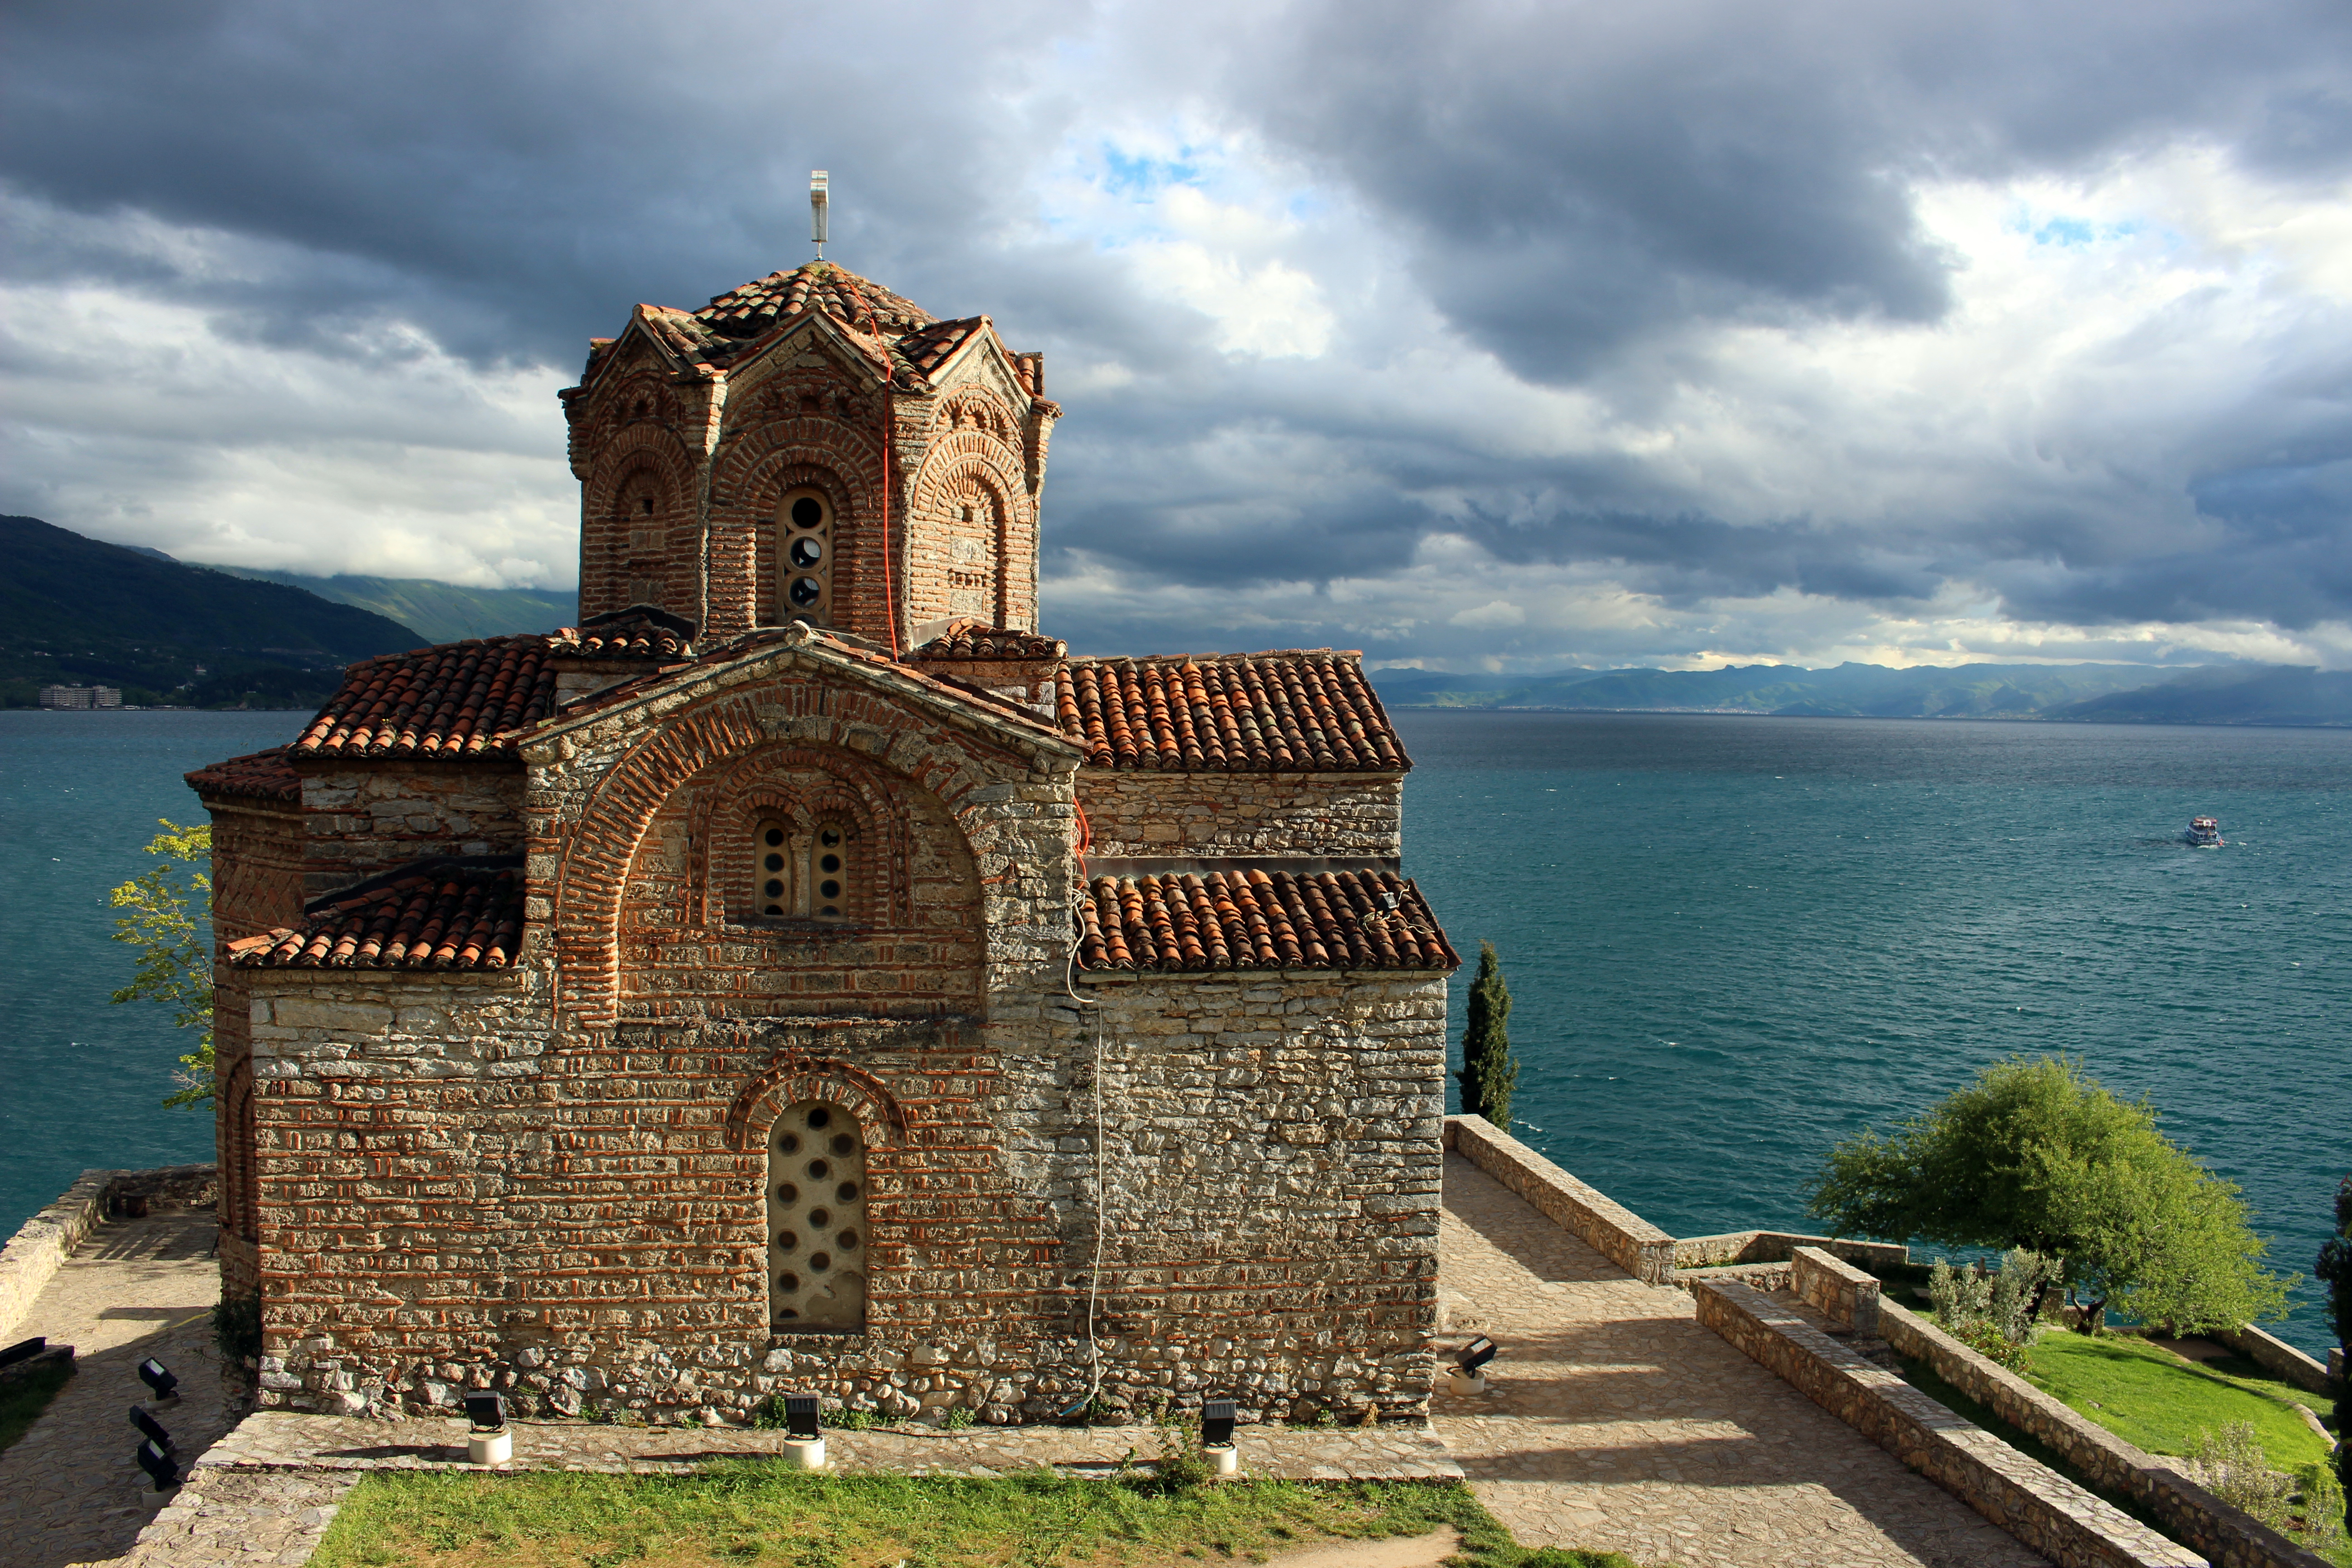 Ohrid is a pretty popular tourist spot for people who live in the Balkans